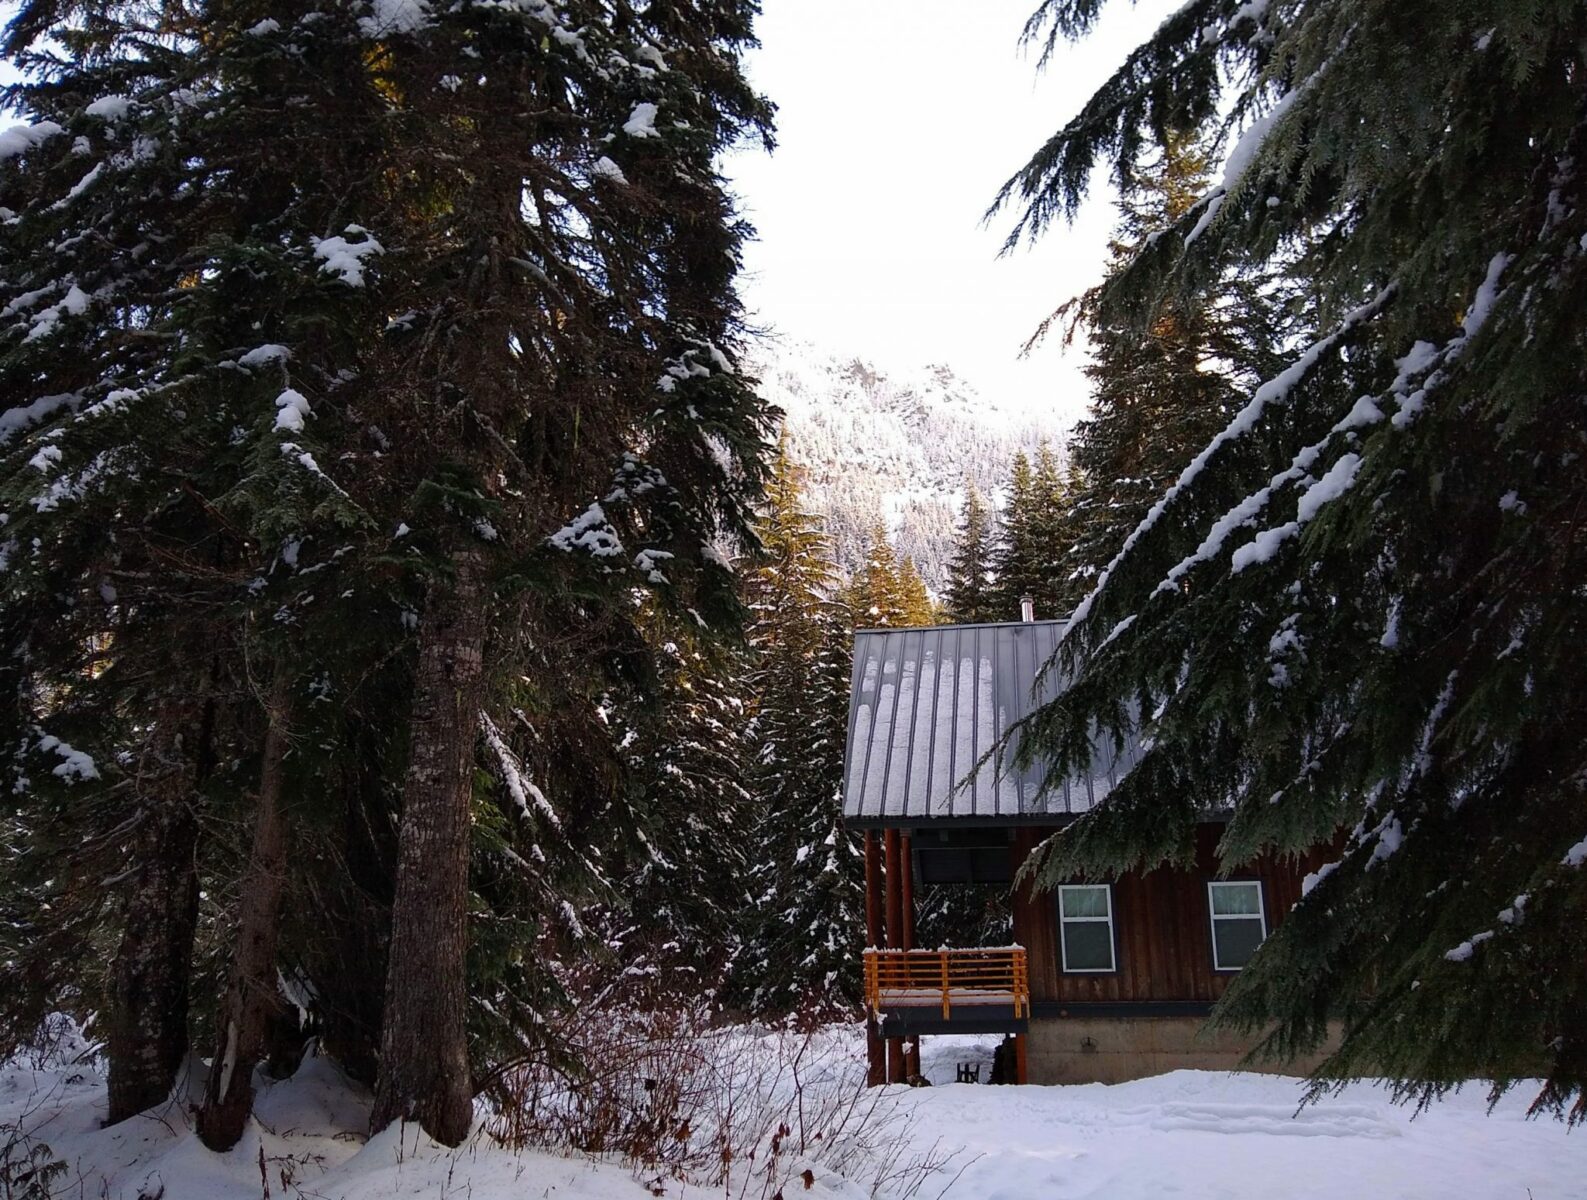 A wooden cabin with a metal roof and a covered porch is surrounded by snow on the evergreen forest and the ground along the gold creek valley snowshoe route. In the distance is a snowy mountain